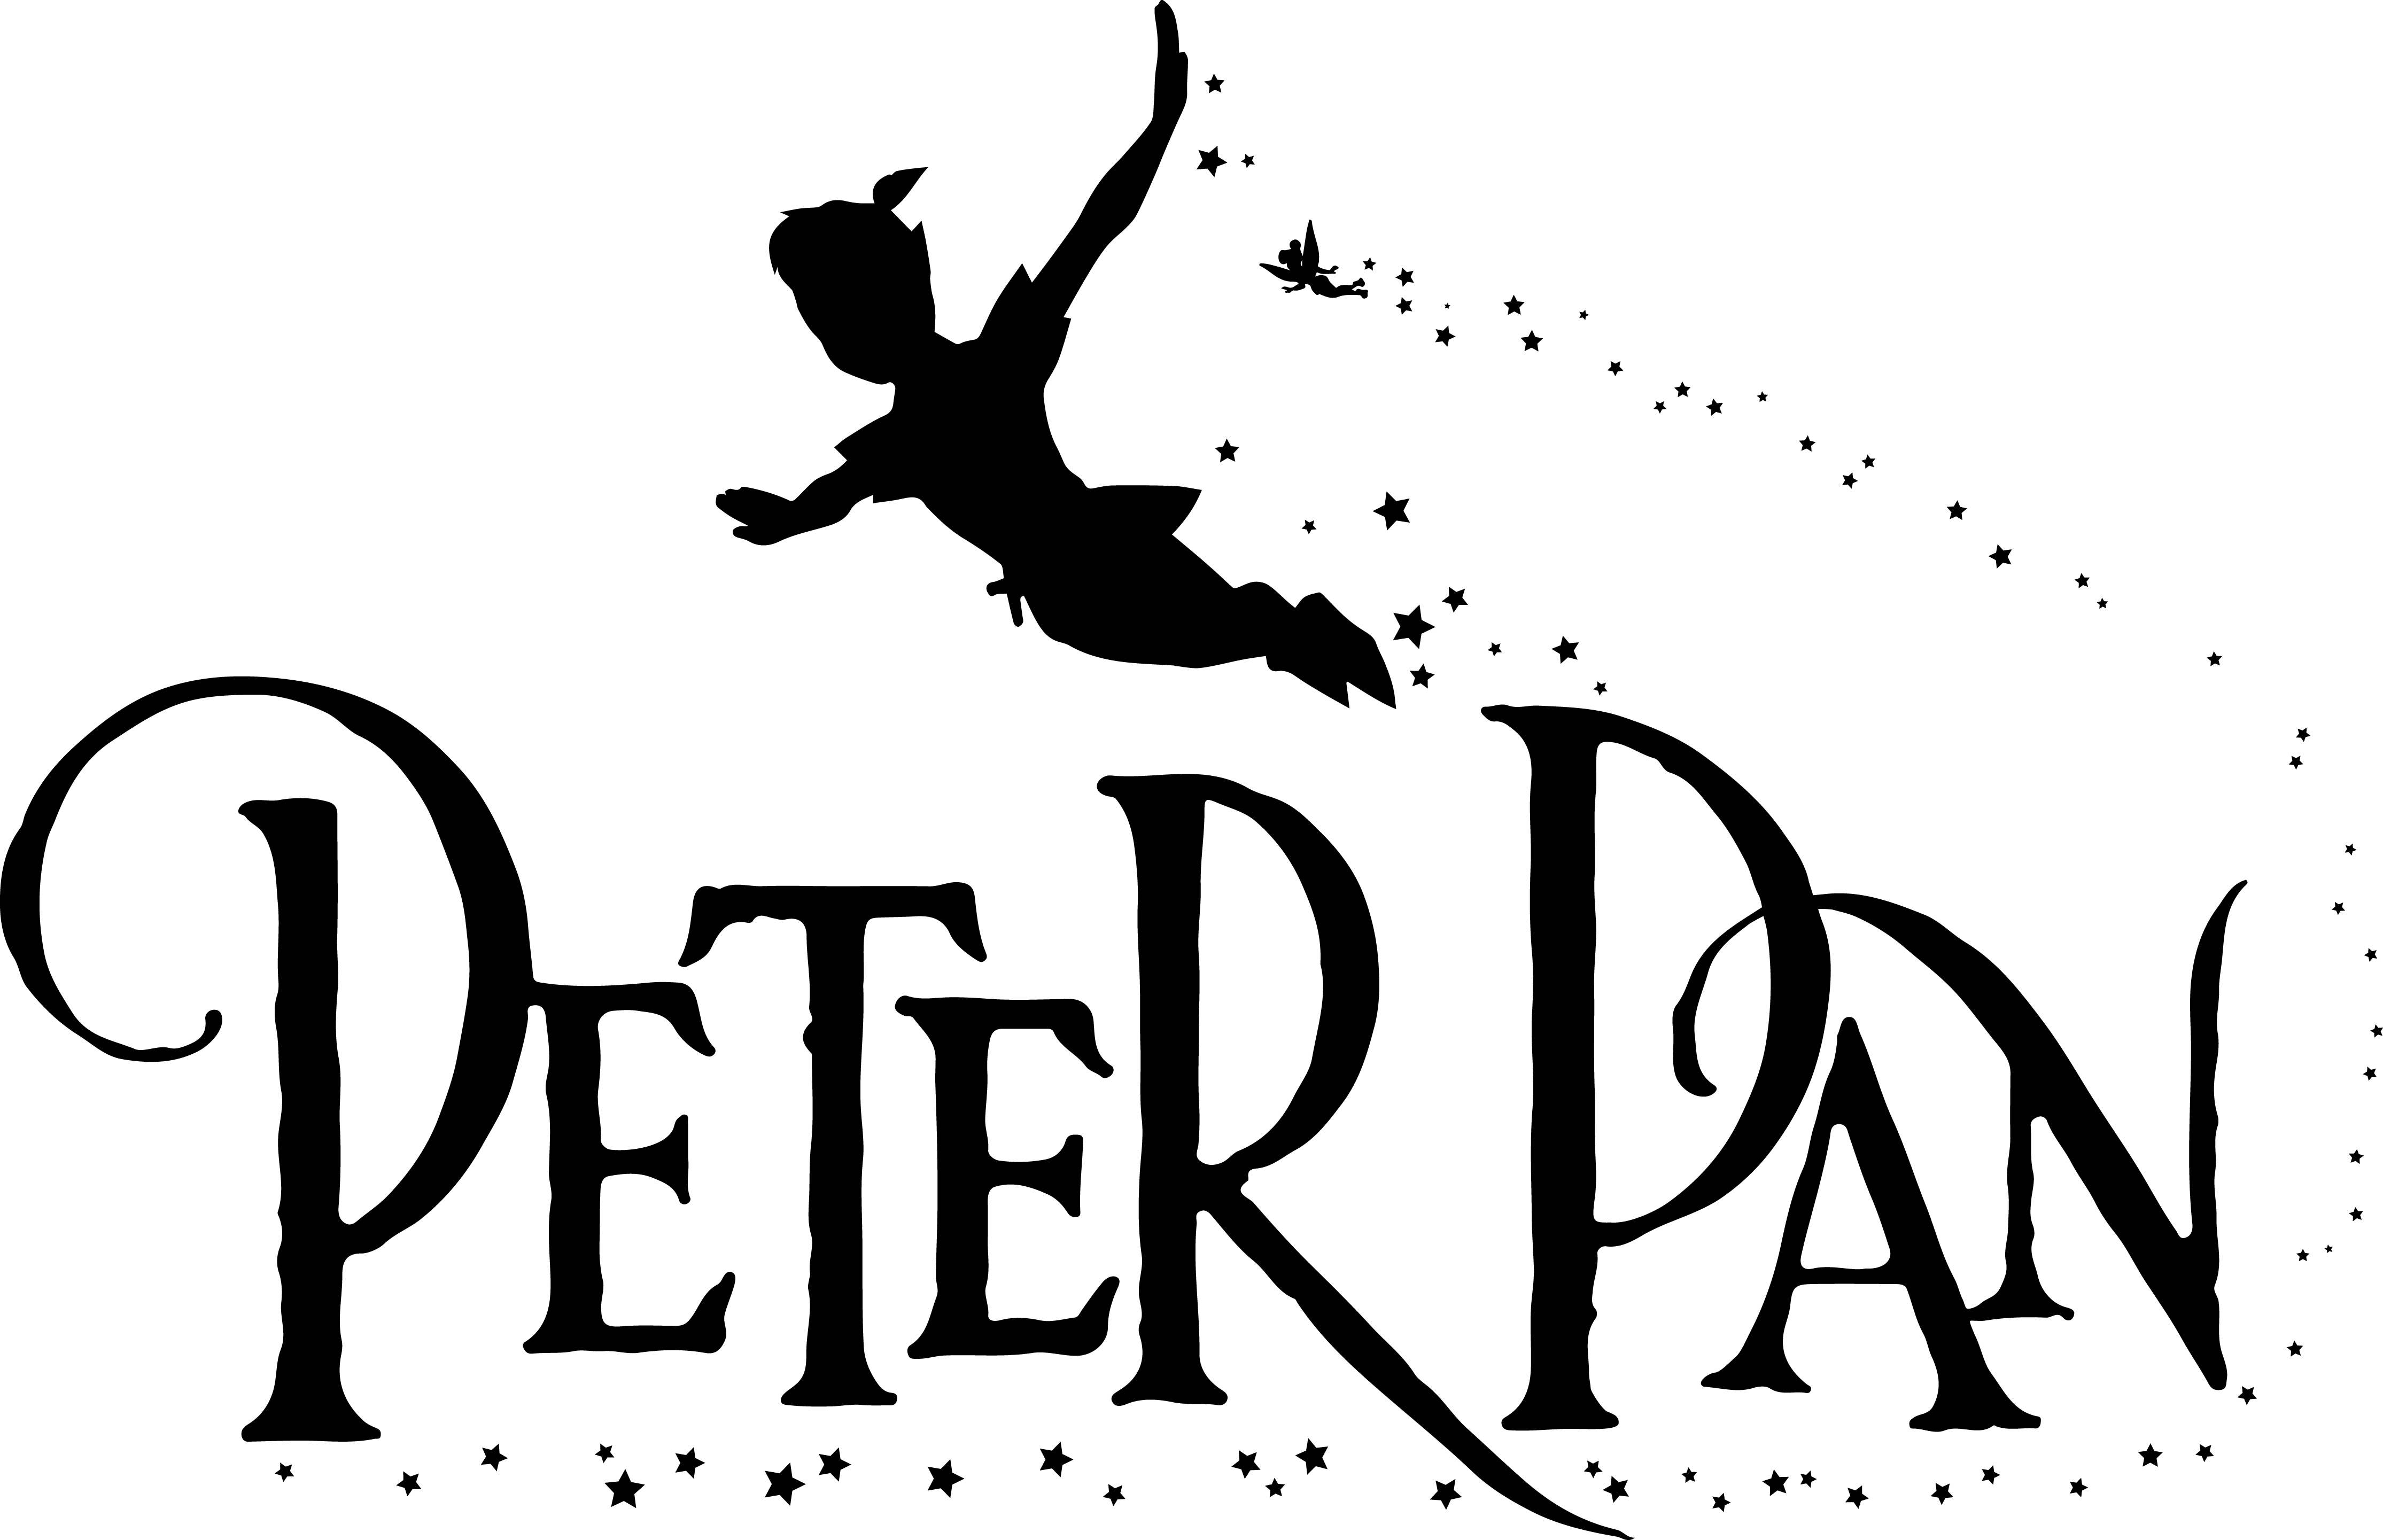 tinkerbell clipart shadow